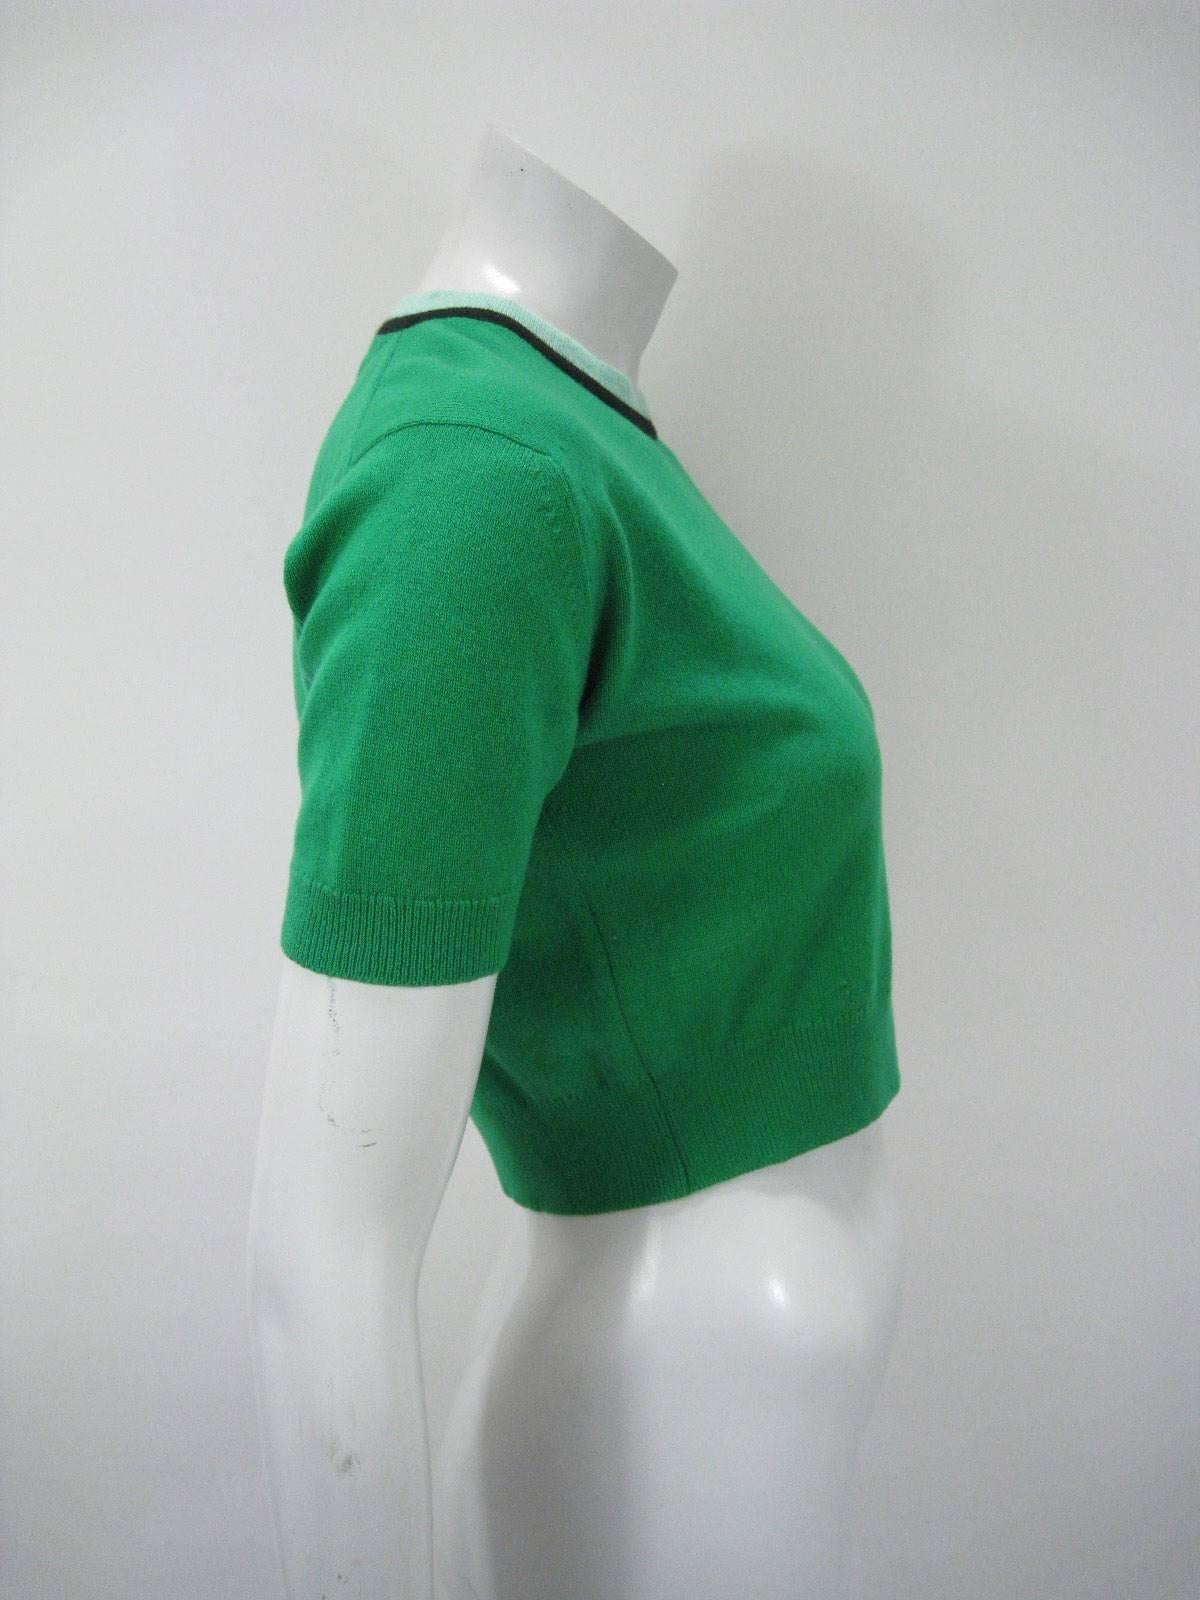 Vintage 1980's Chanel vibrant green sweater.

Cropped, fitted shape.

Short sleeves.

Ringed neckline in contrasting mint green and black.

Chanel imprinted button closure on back of neck.

No size tag.

No fabric tag, feels like wool, possibly a